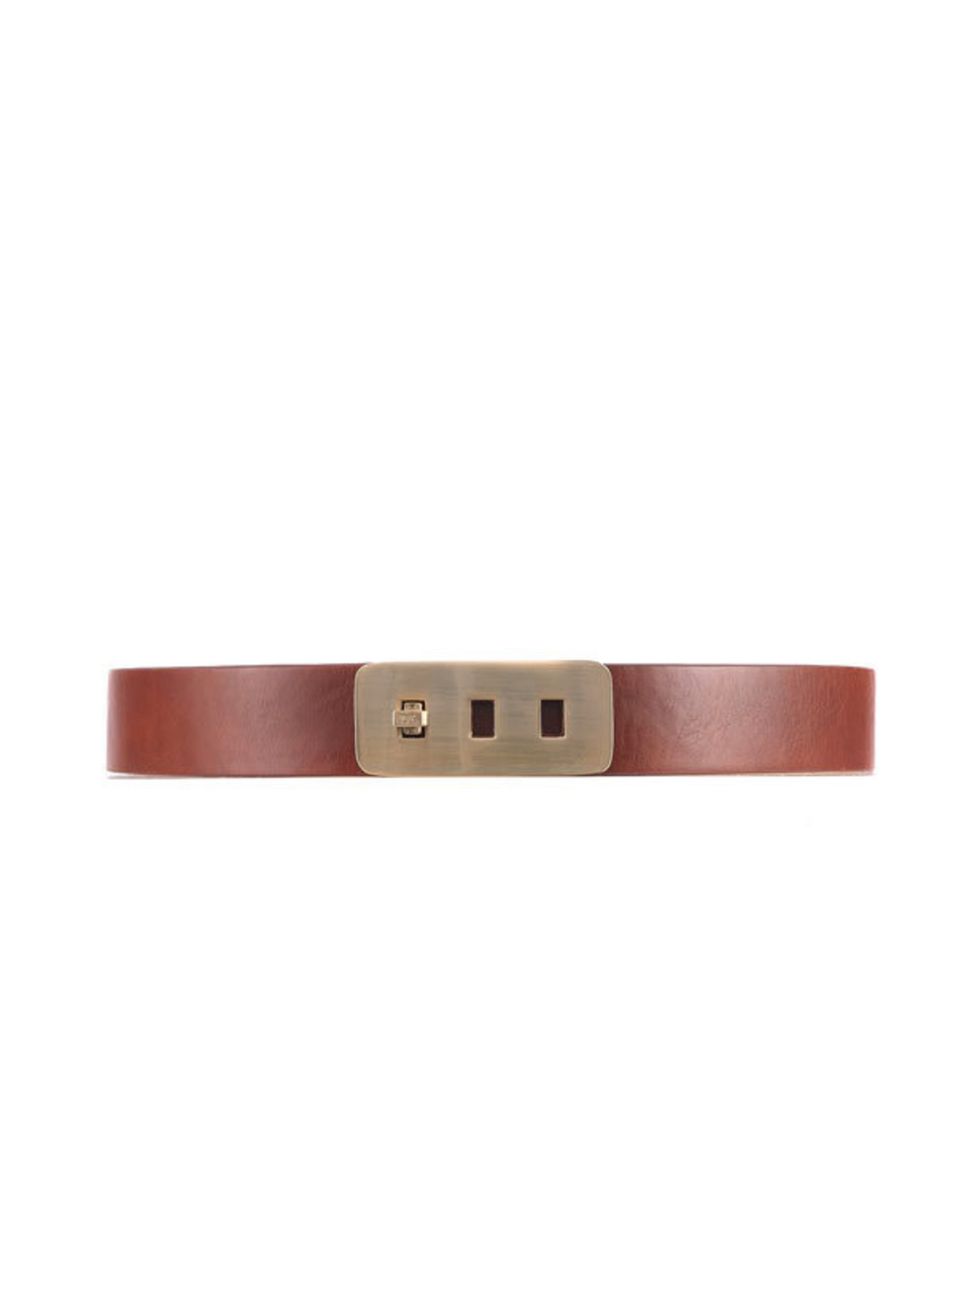 <p>THE BELT</p><p>Diane Von Furstenberg leather and metal belt, £145, for stockists call 0207 499 0886</p>